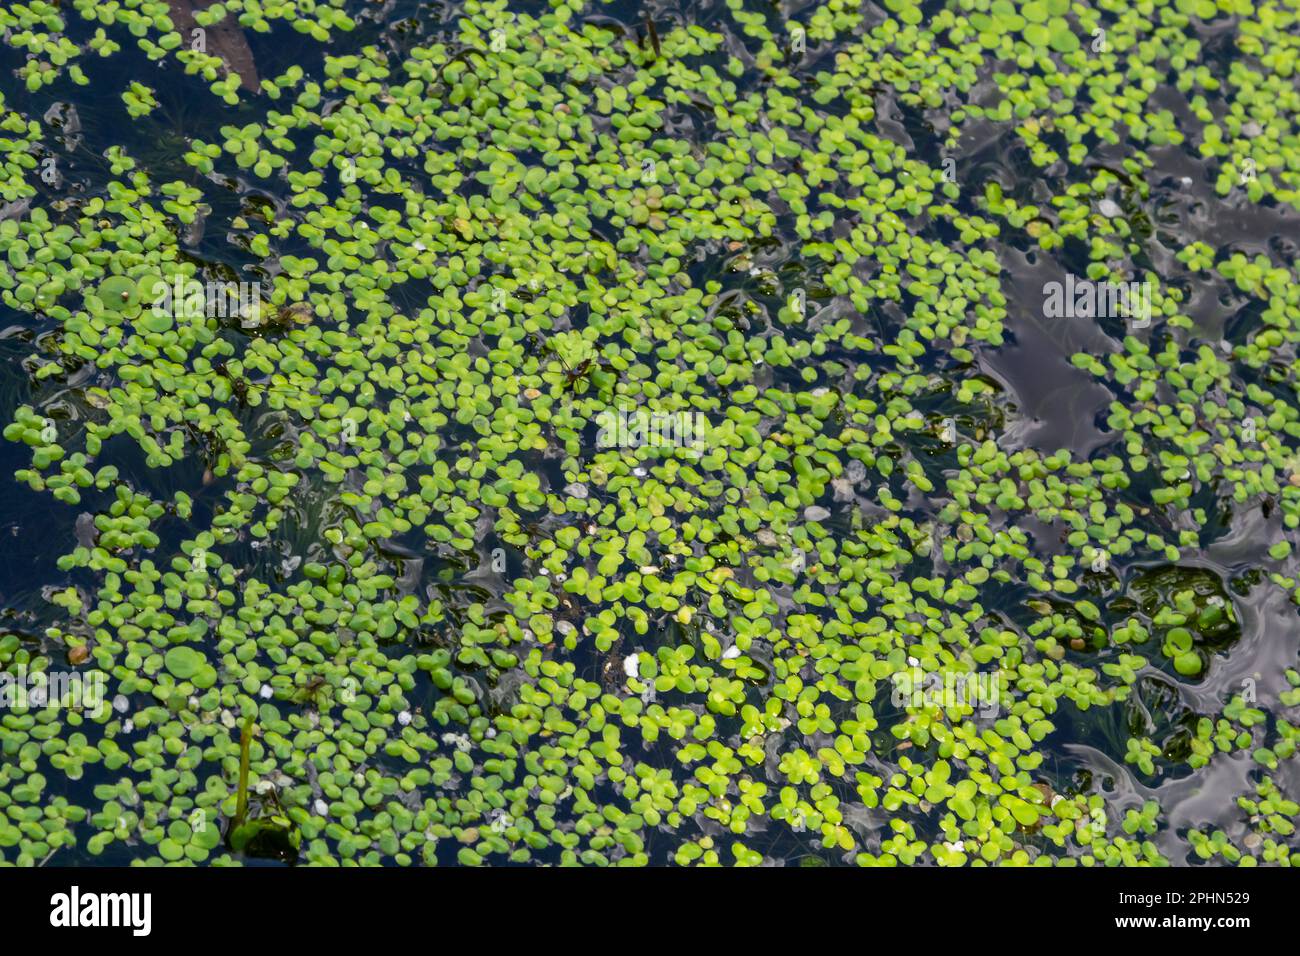 Common Duckweed, Duckweed, Lesser Duckweed, Natural Green Duckweed Lemna perpusilla Torrey on The water for background or texture. close up Green leaf Stock Photo